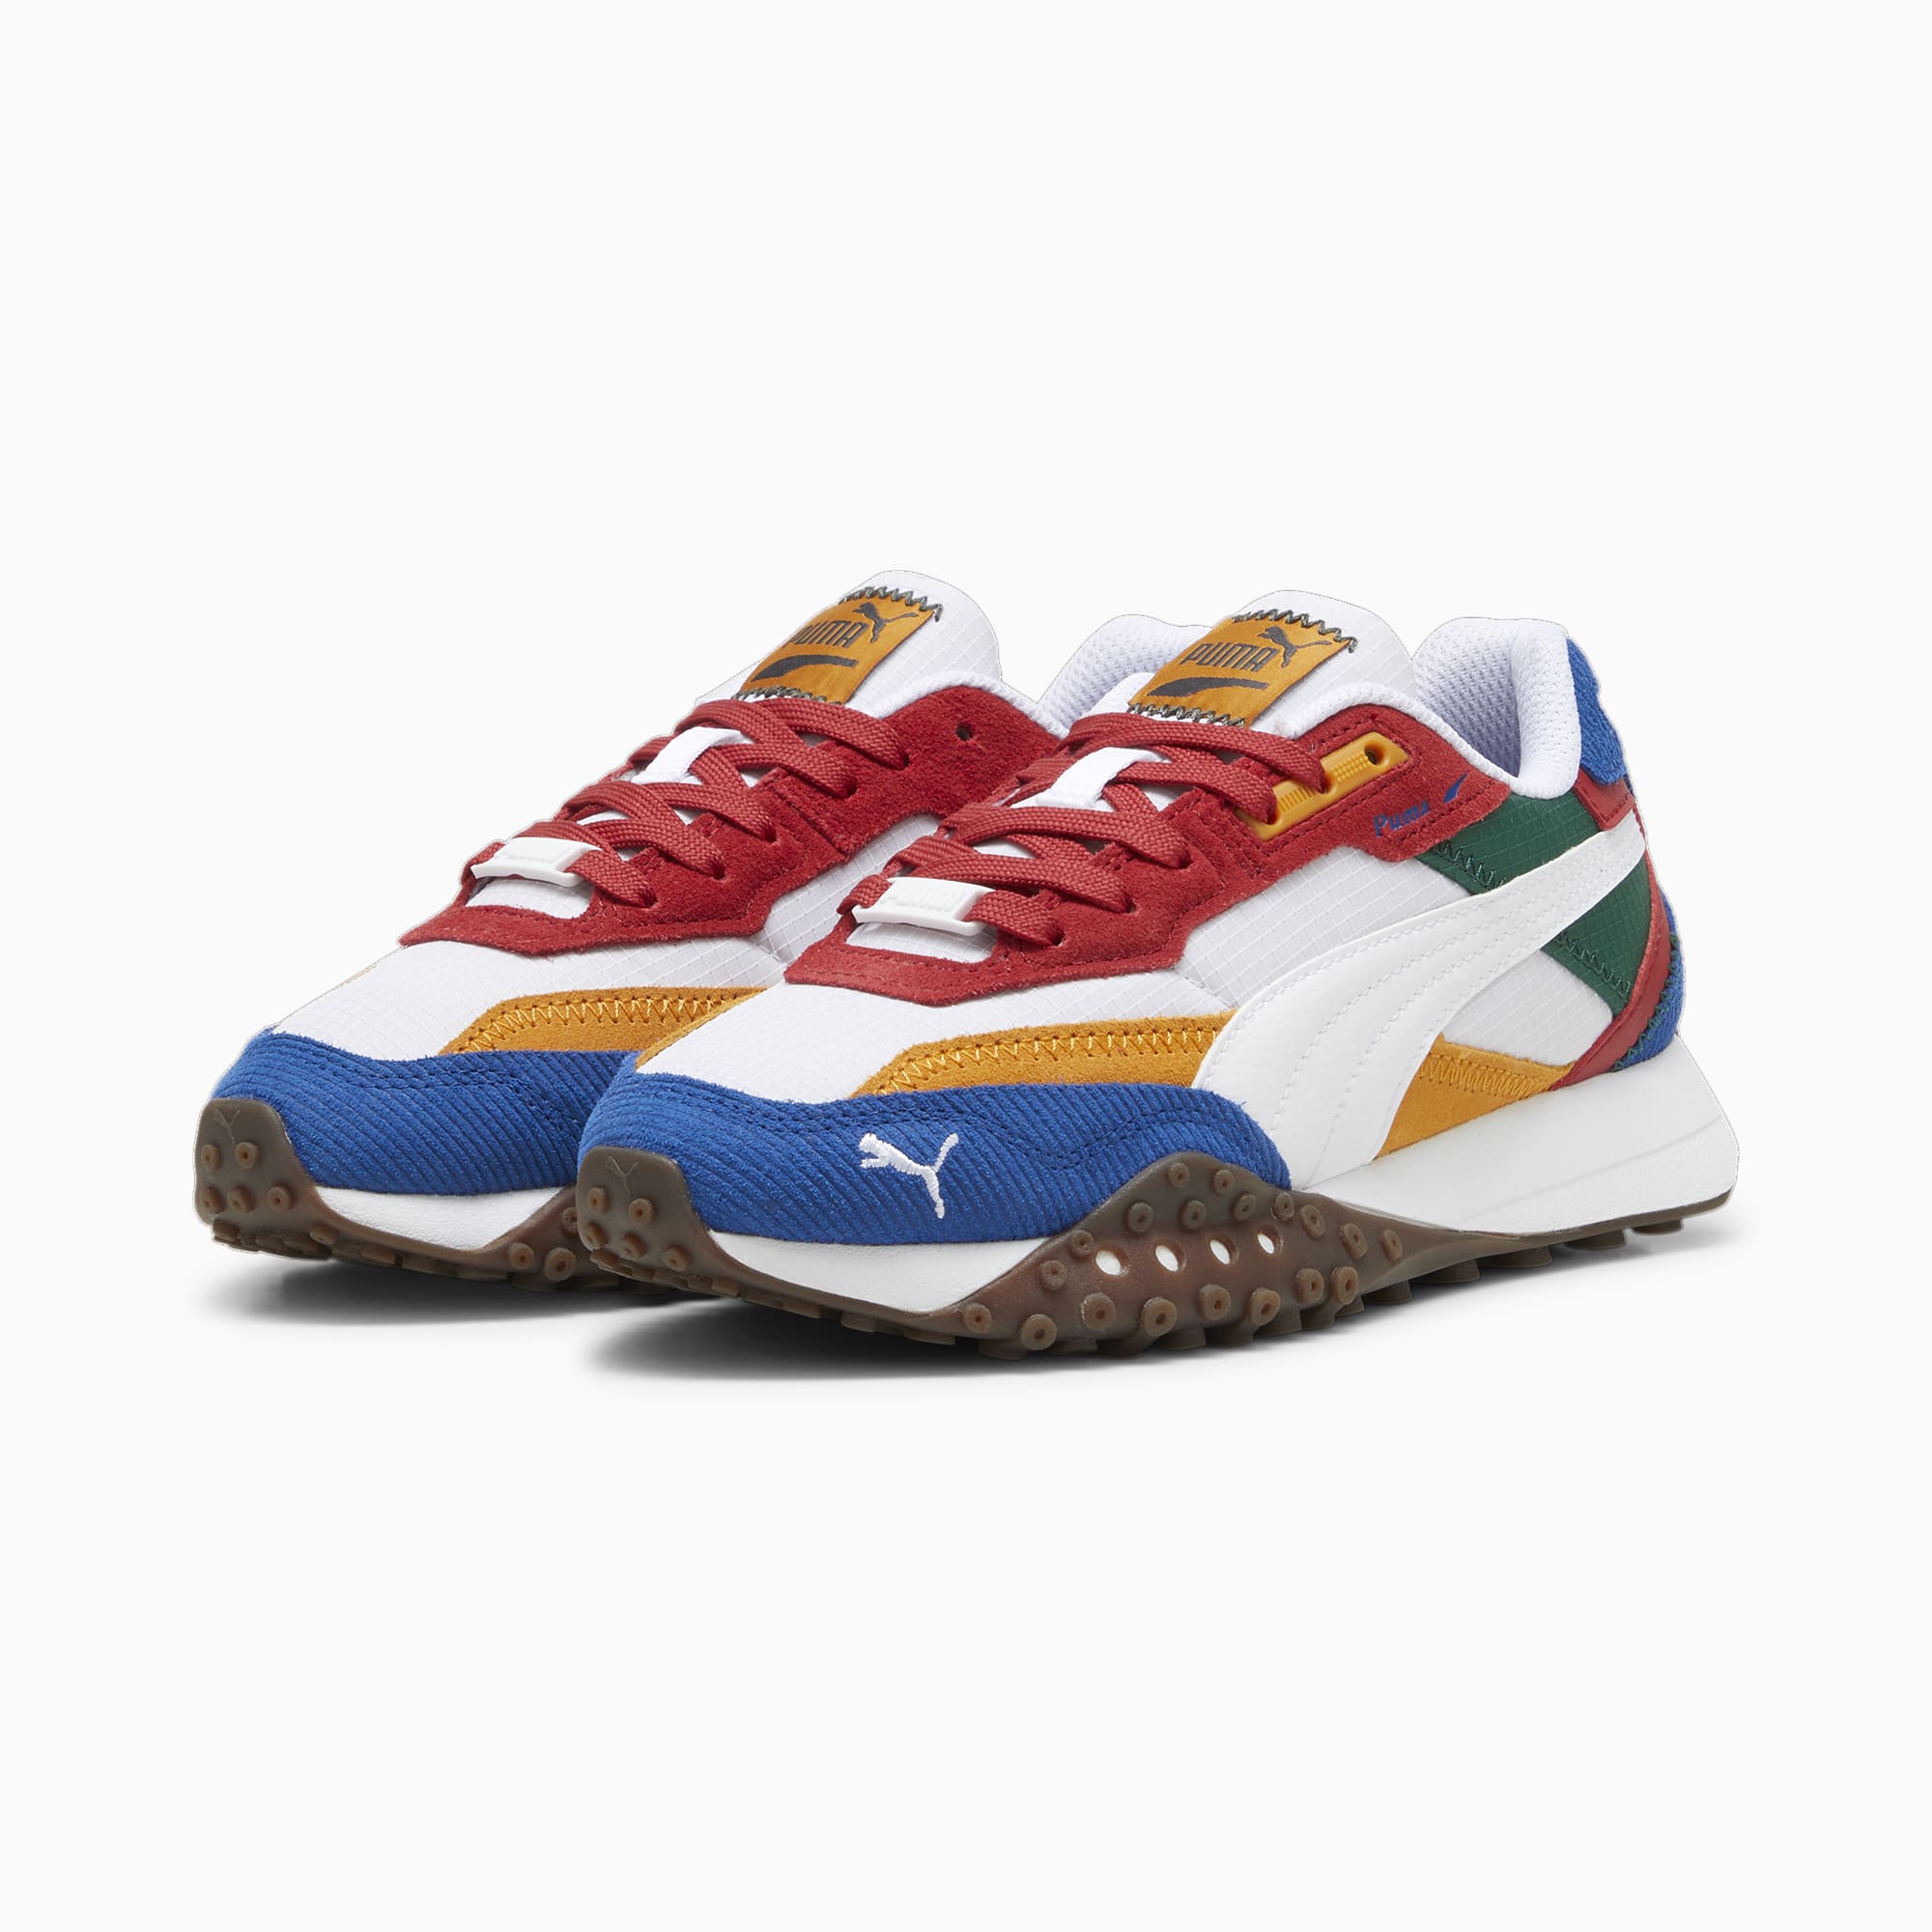 PUMA Blktop Rider Multicolour Youth Sneakers, White/Club Red